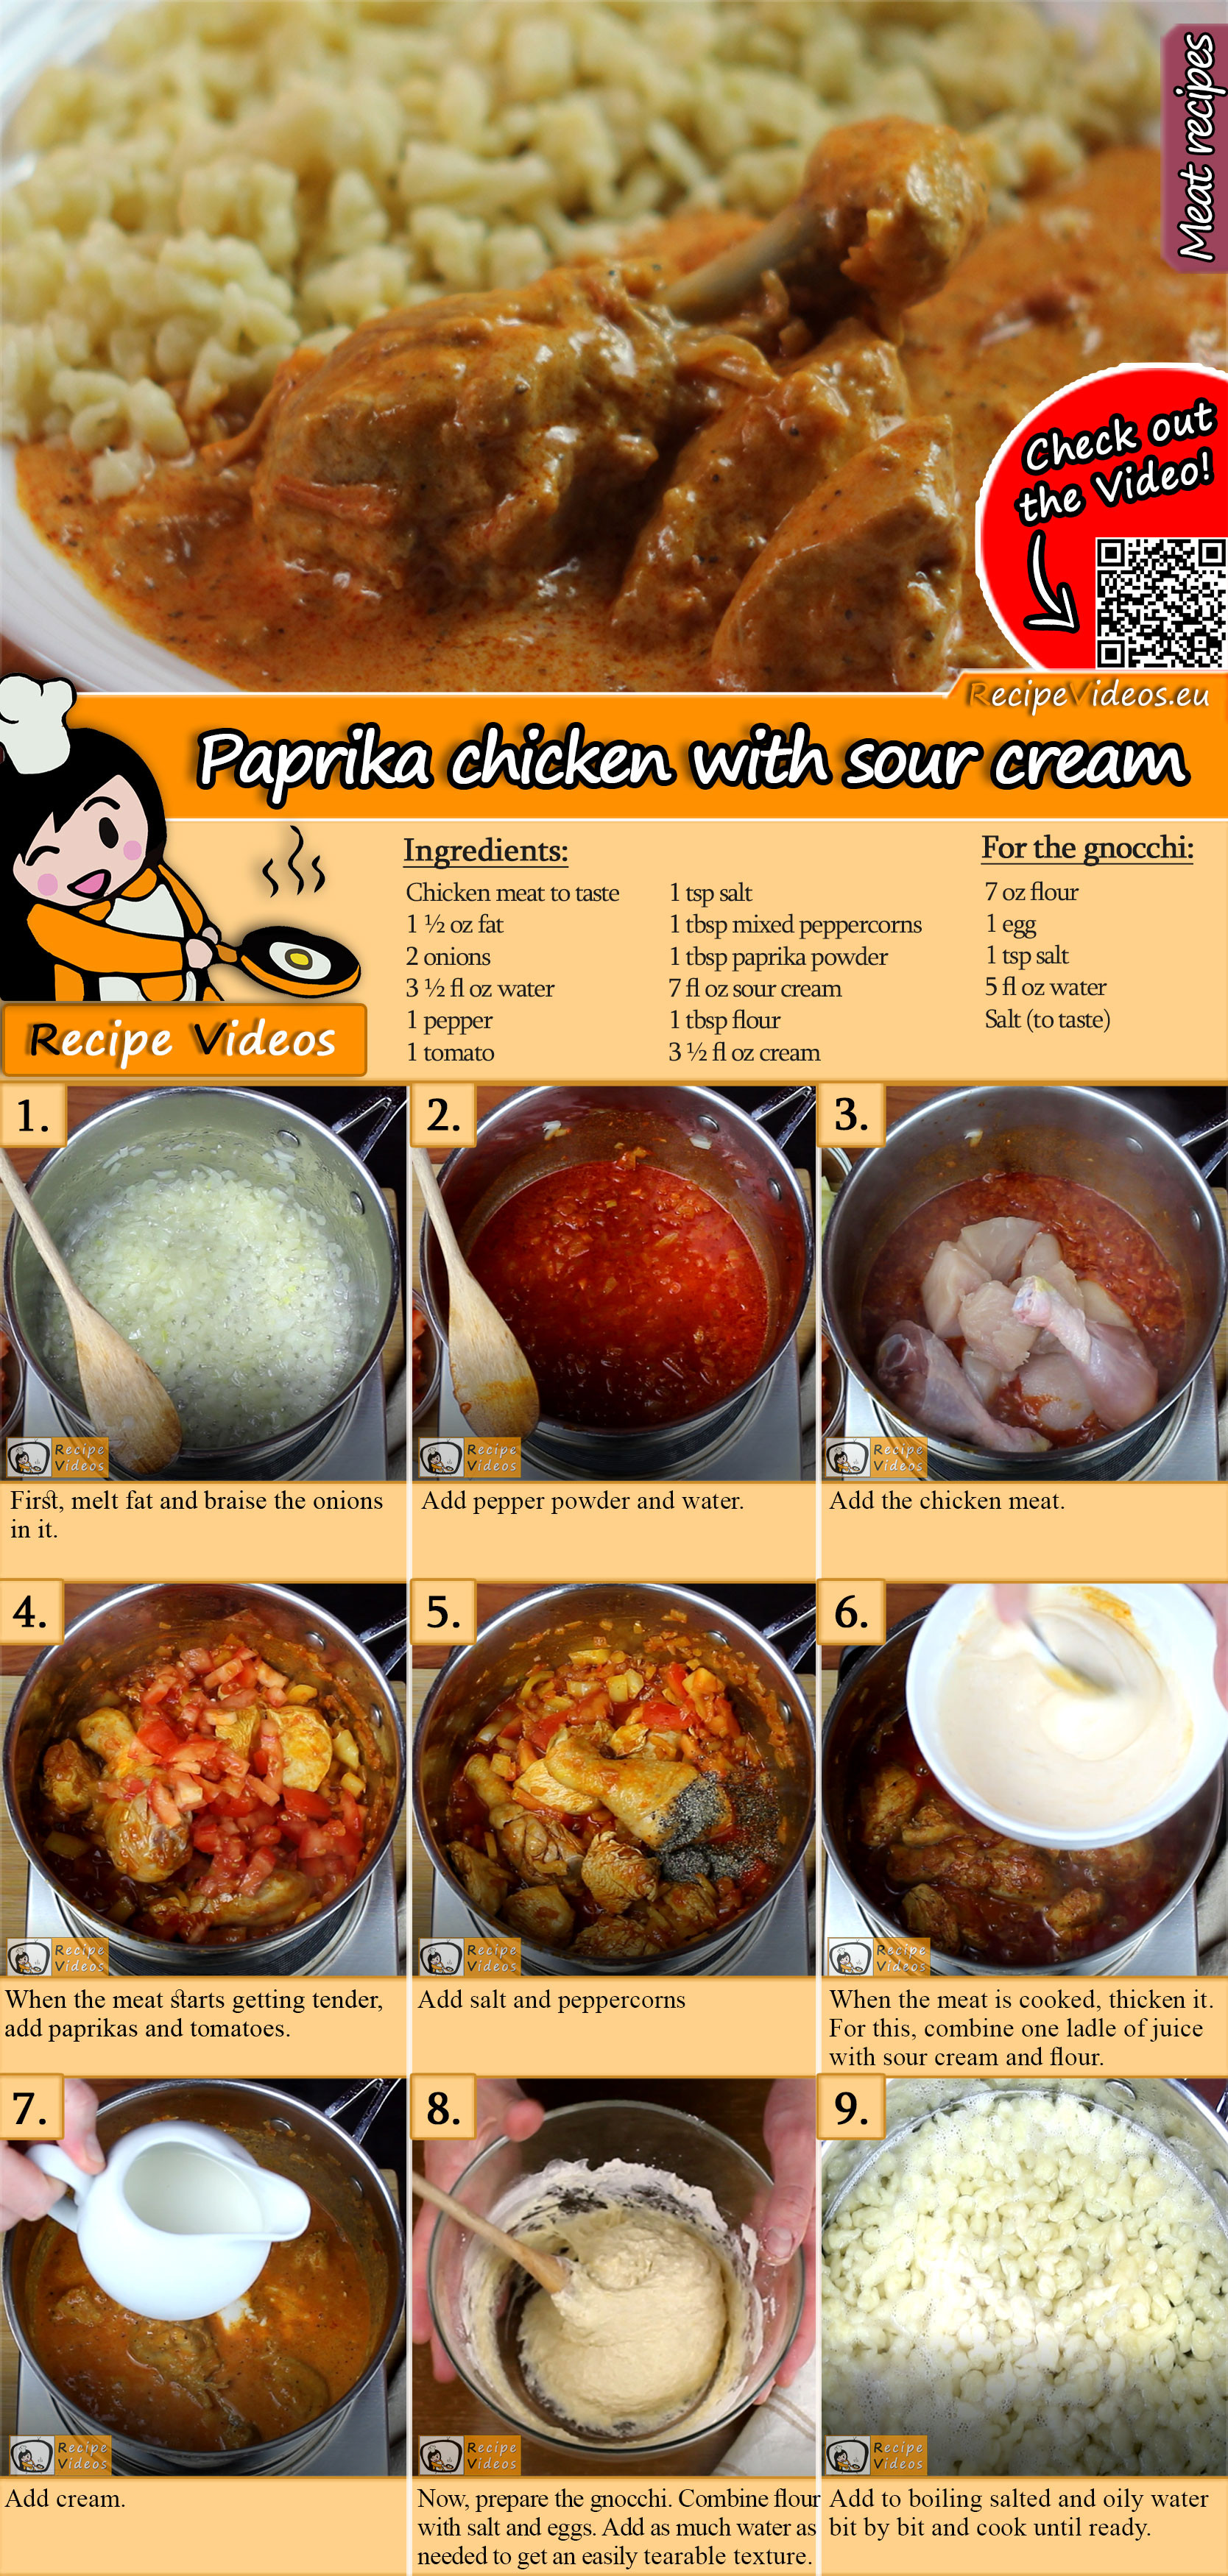 Paprika chicken with sour cream recipe with video